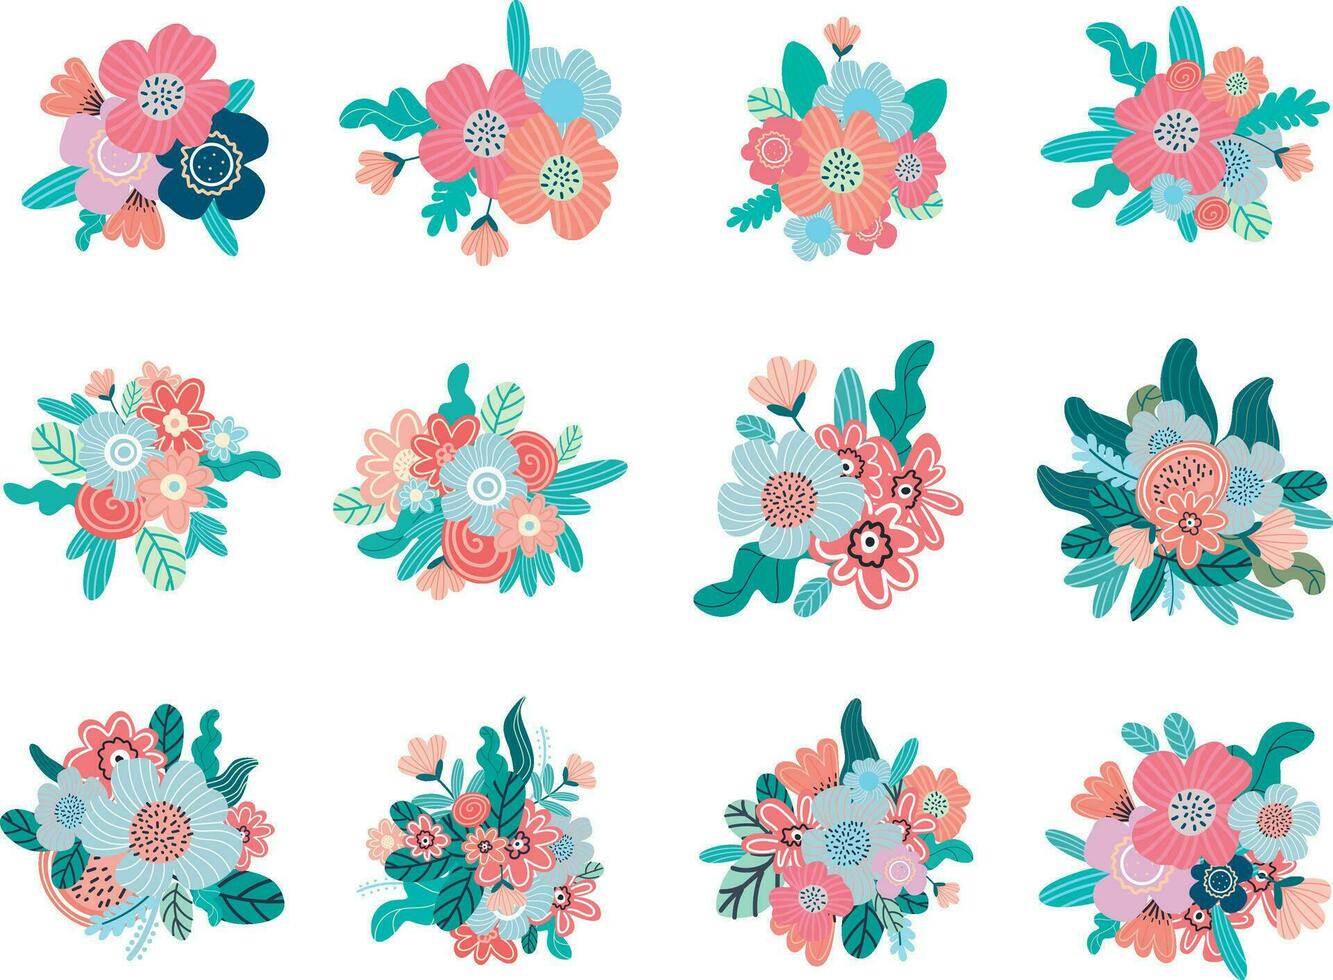 A collection of bright floral bouquets of field and garden flowers. Delicate Floral Arrangement vector